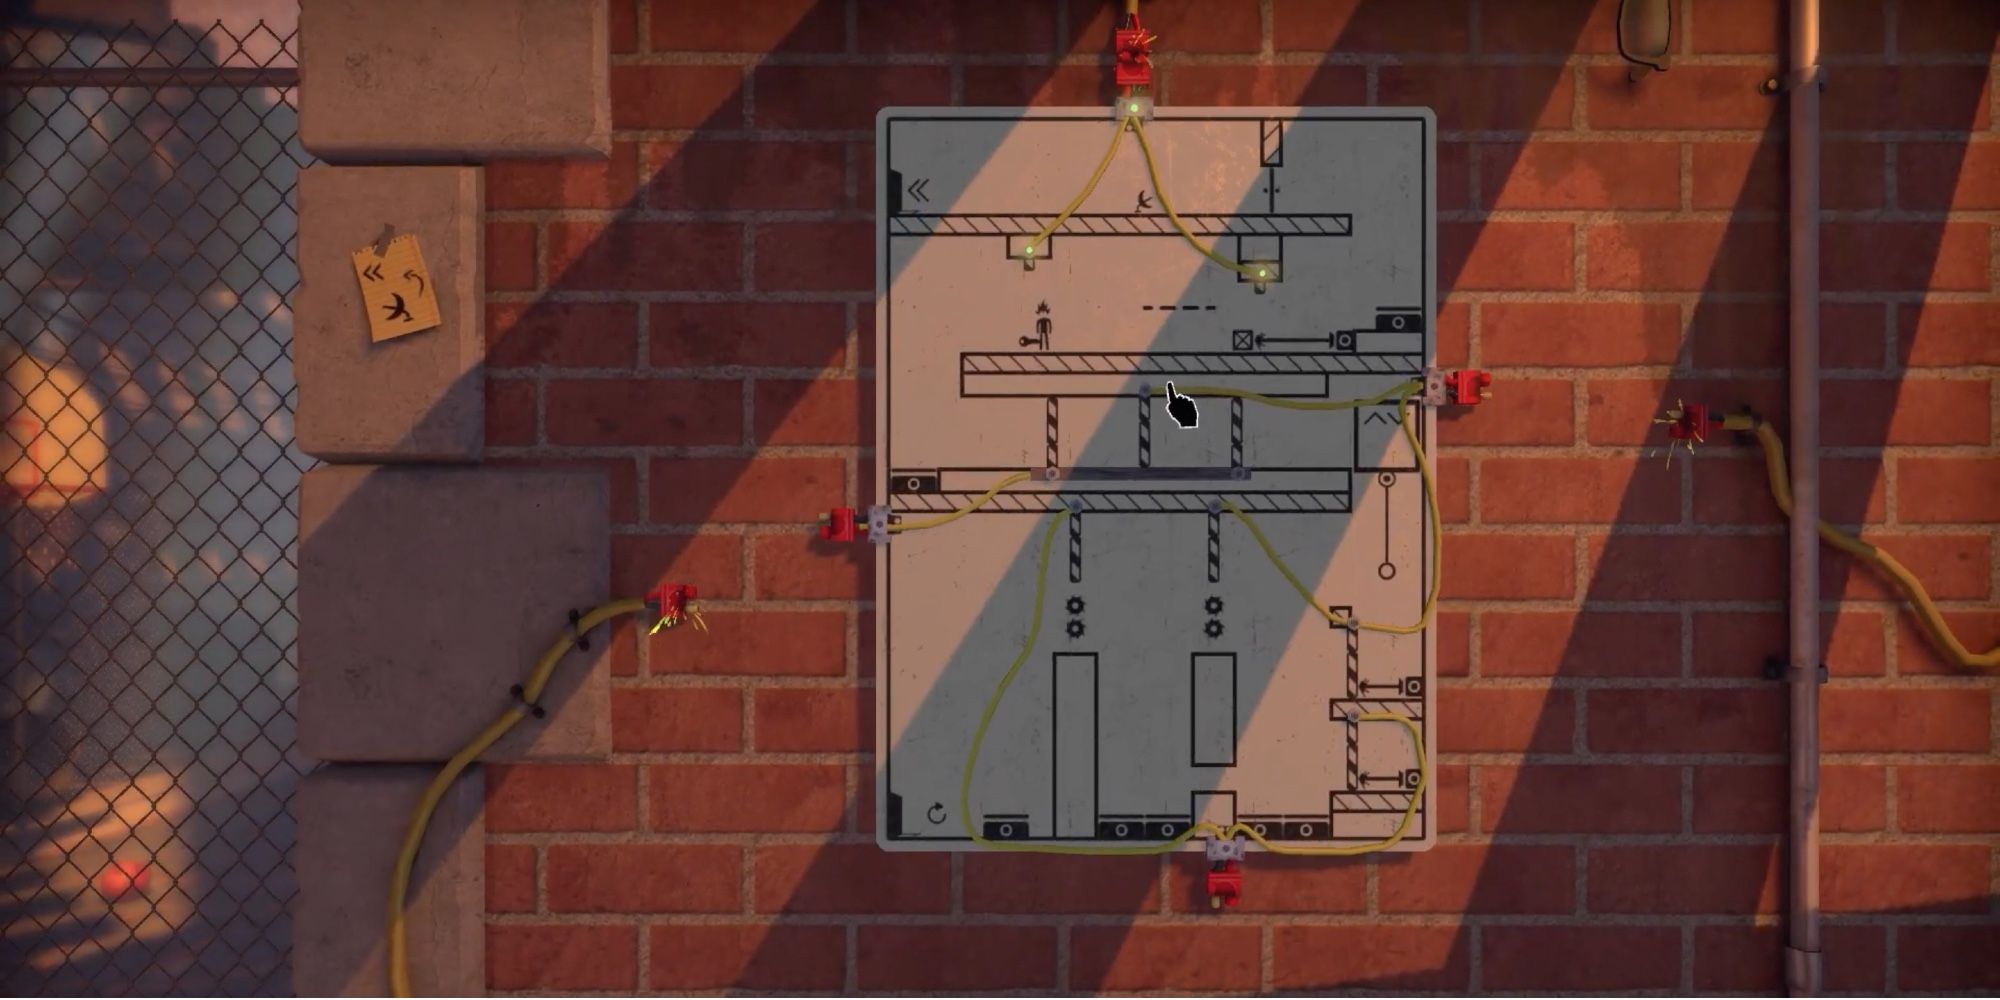 The Pedestrian - Sockets can Unlock Paths - Player moves the board to activate sockets